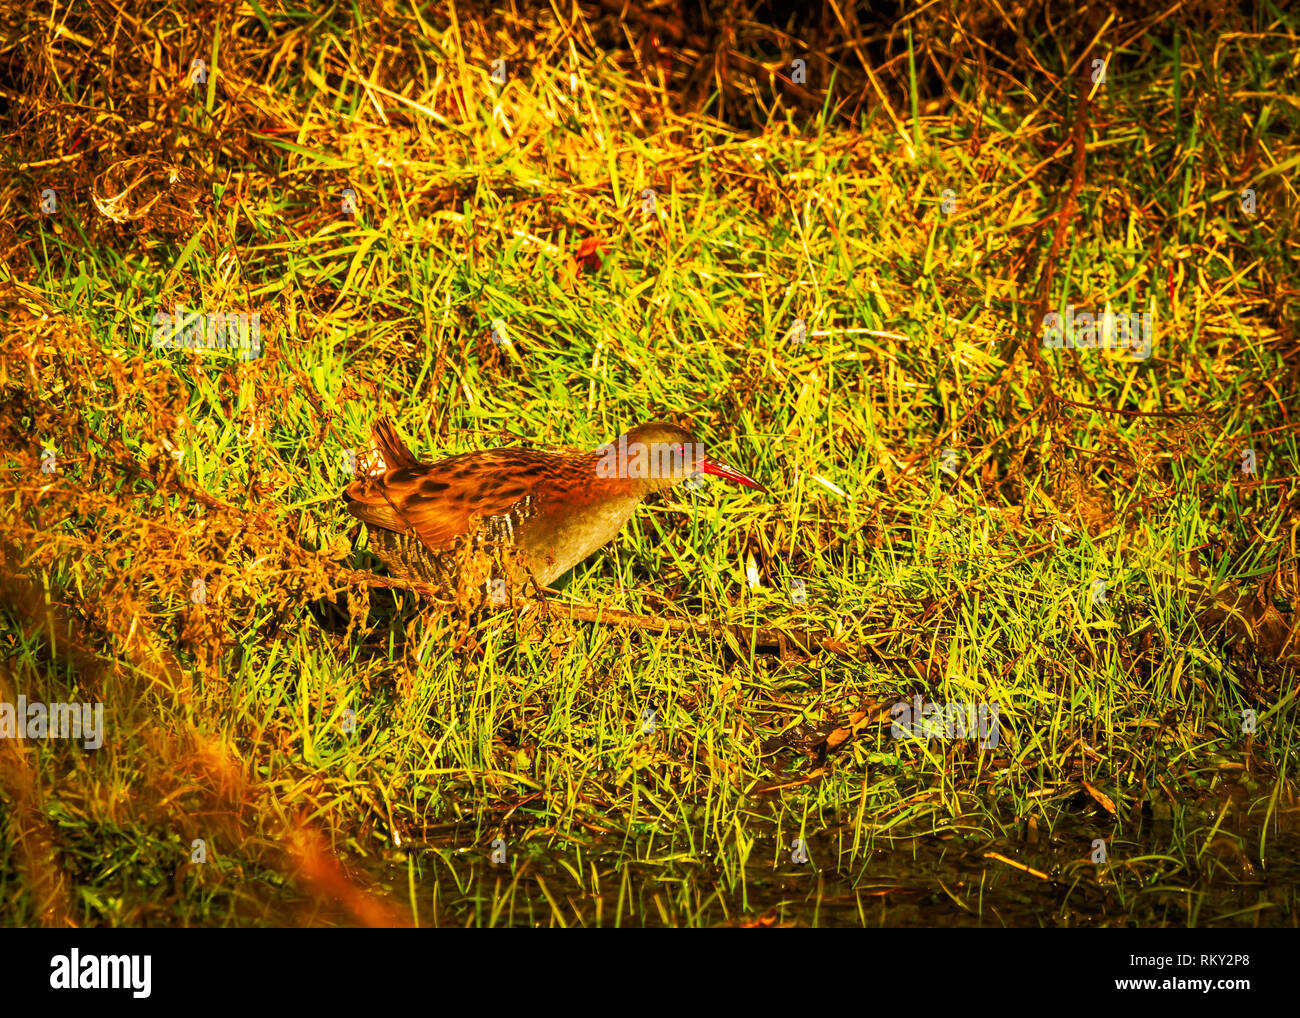 The water rail (Rallus aquaticus) is a bird of the rail family which breeds in well-vegetated wetlands across Europe, February 2019 Northwich Cheshire Stock Photo